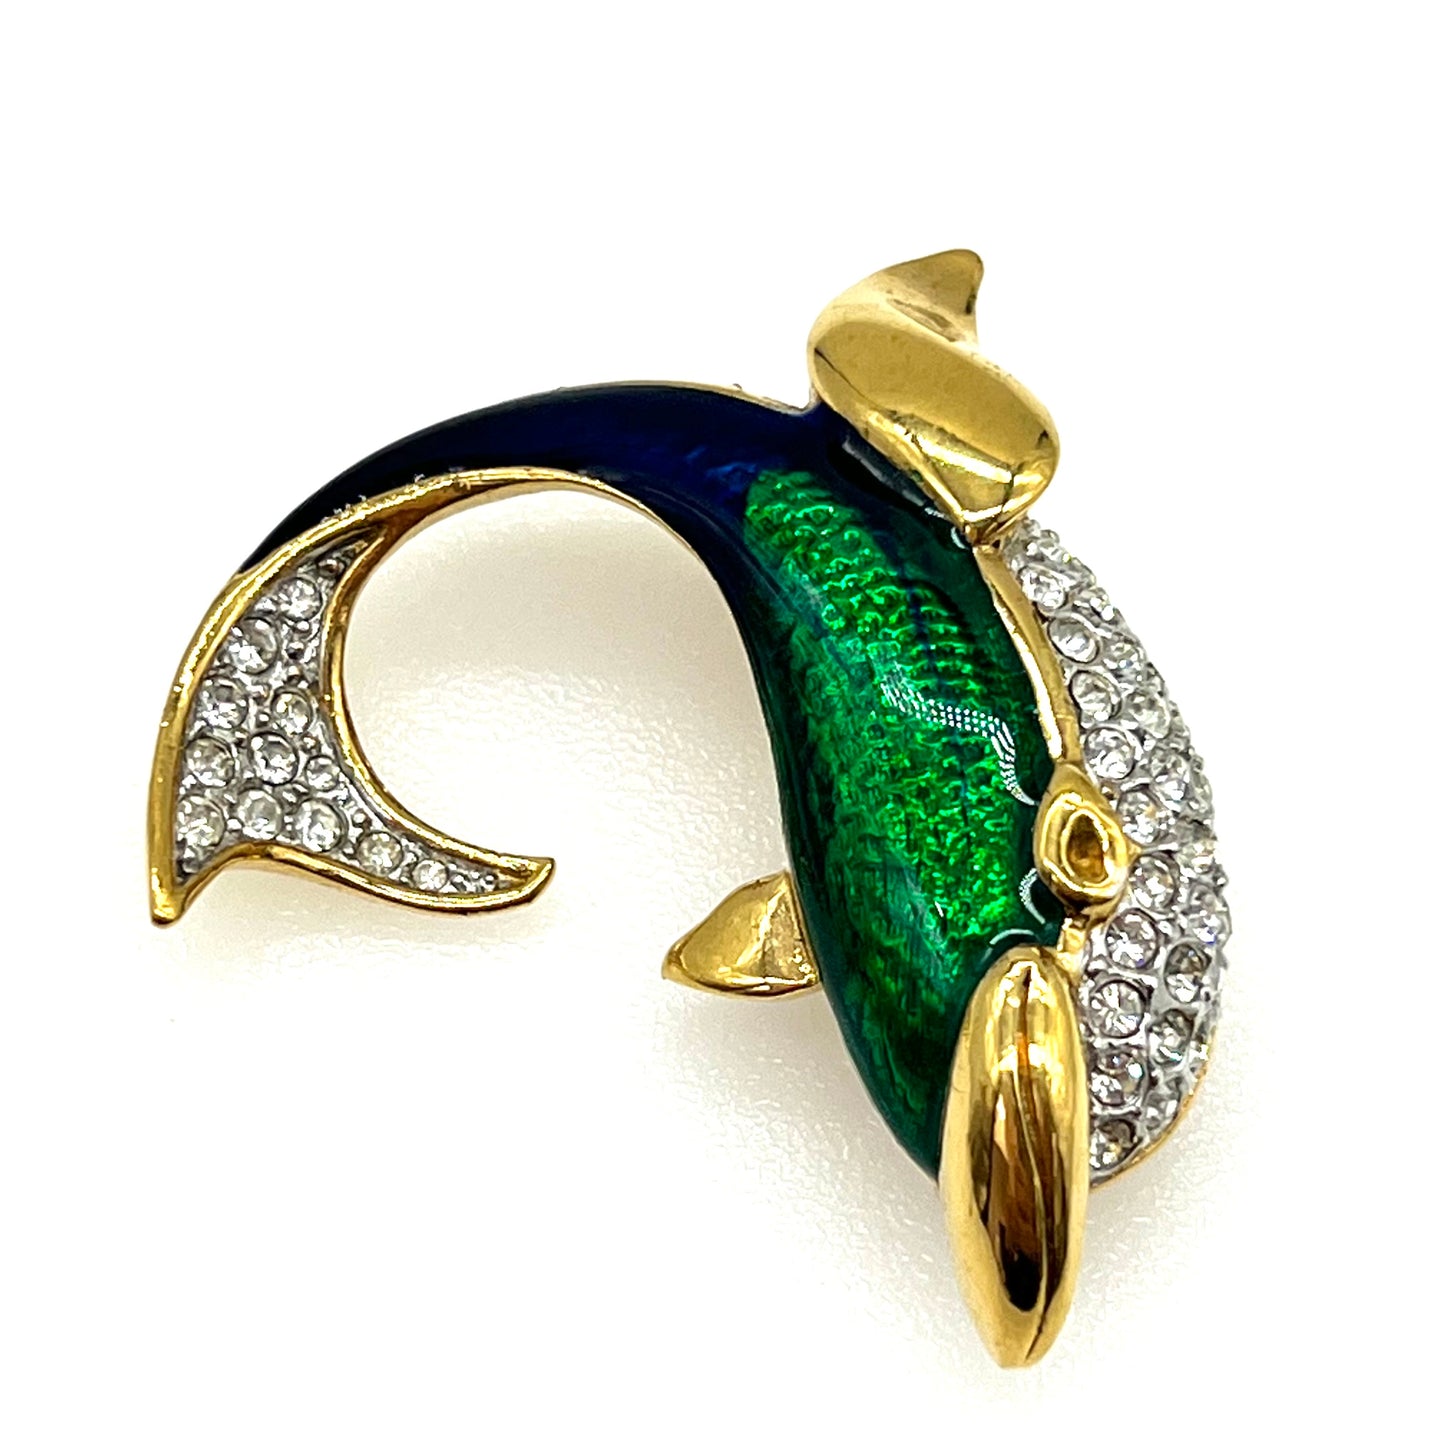 Large Attwood and Sawyer 22ct Gold Plated Dolphin Pave and Enamel Brooch